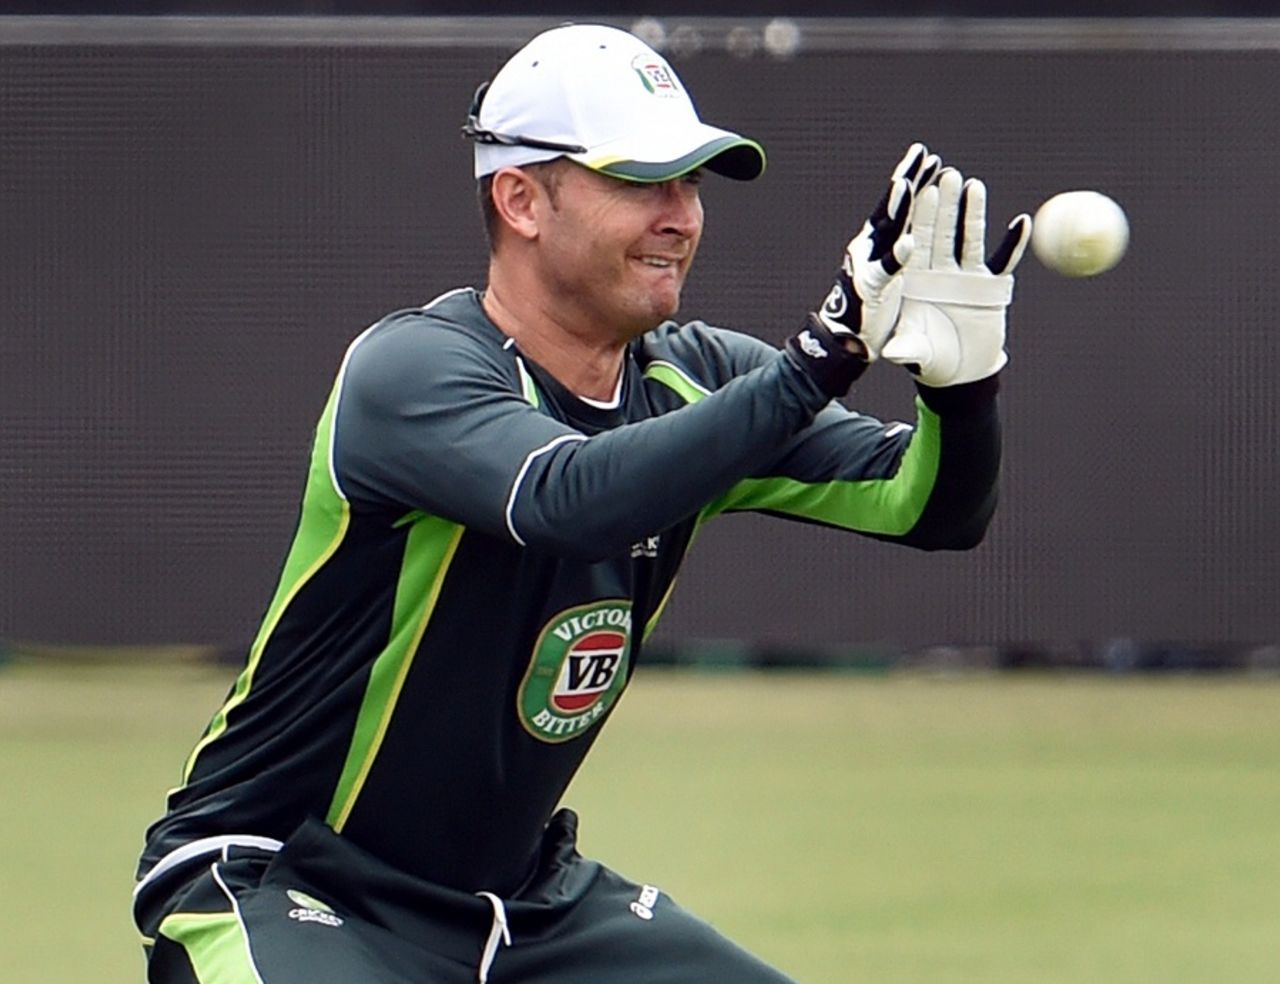 Michael Clarke prepares to catch the ball during training, World Cup 2015, Sydney, March 7, 2015